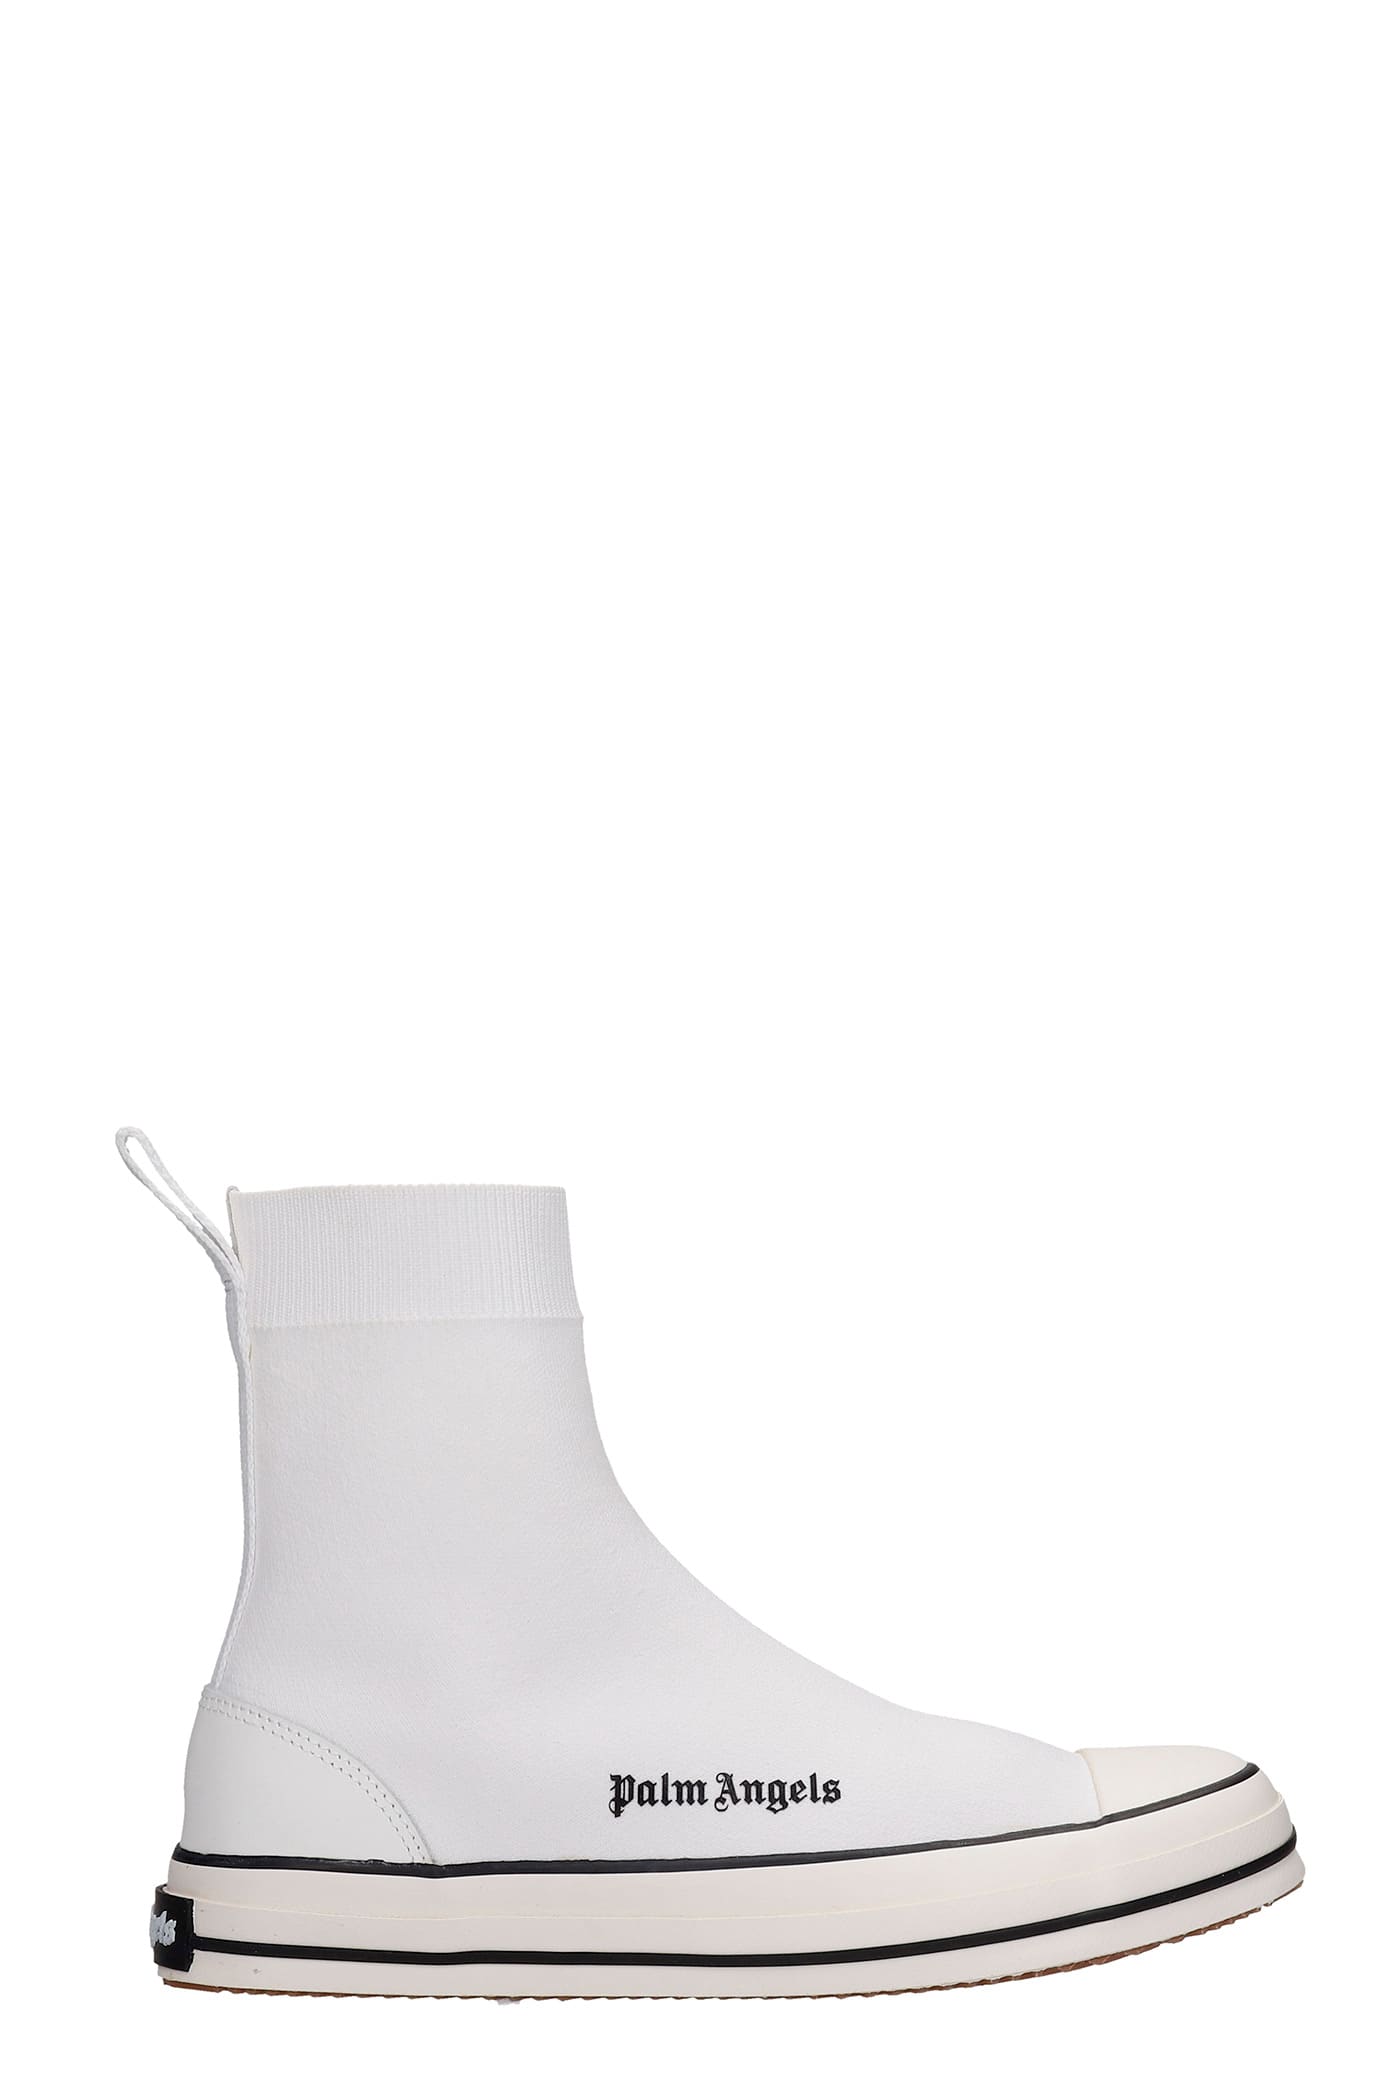 Palm Angels Sneakers In White Synthetic Fibers